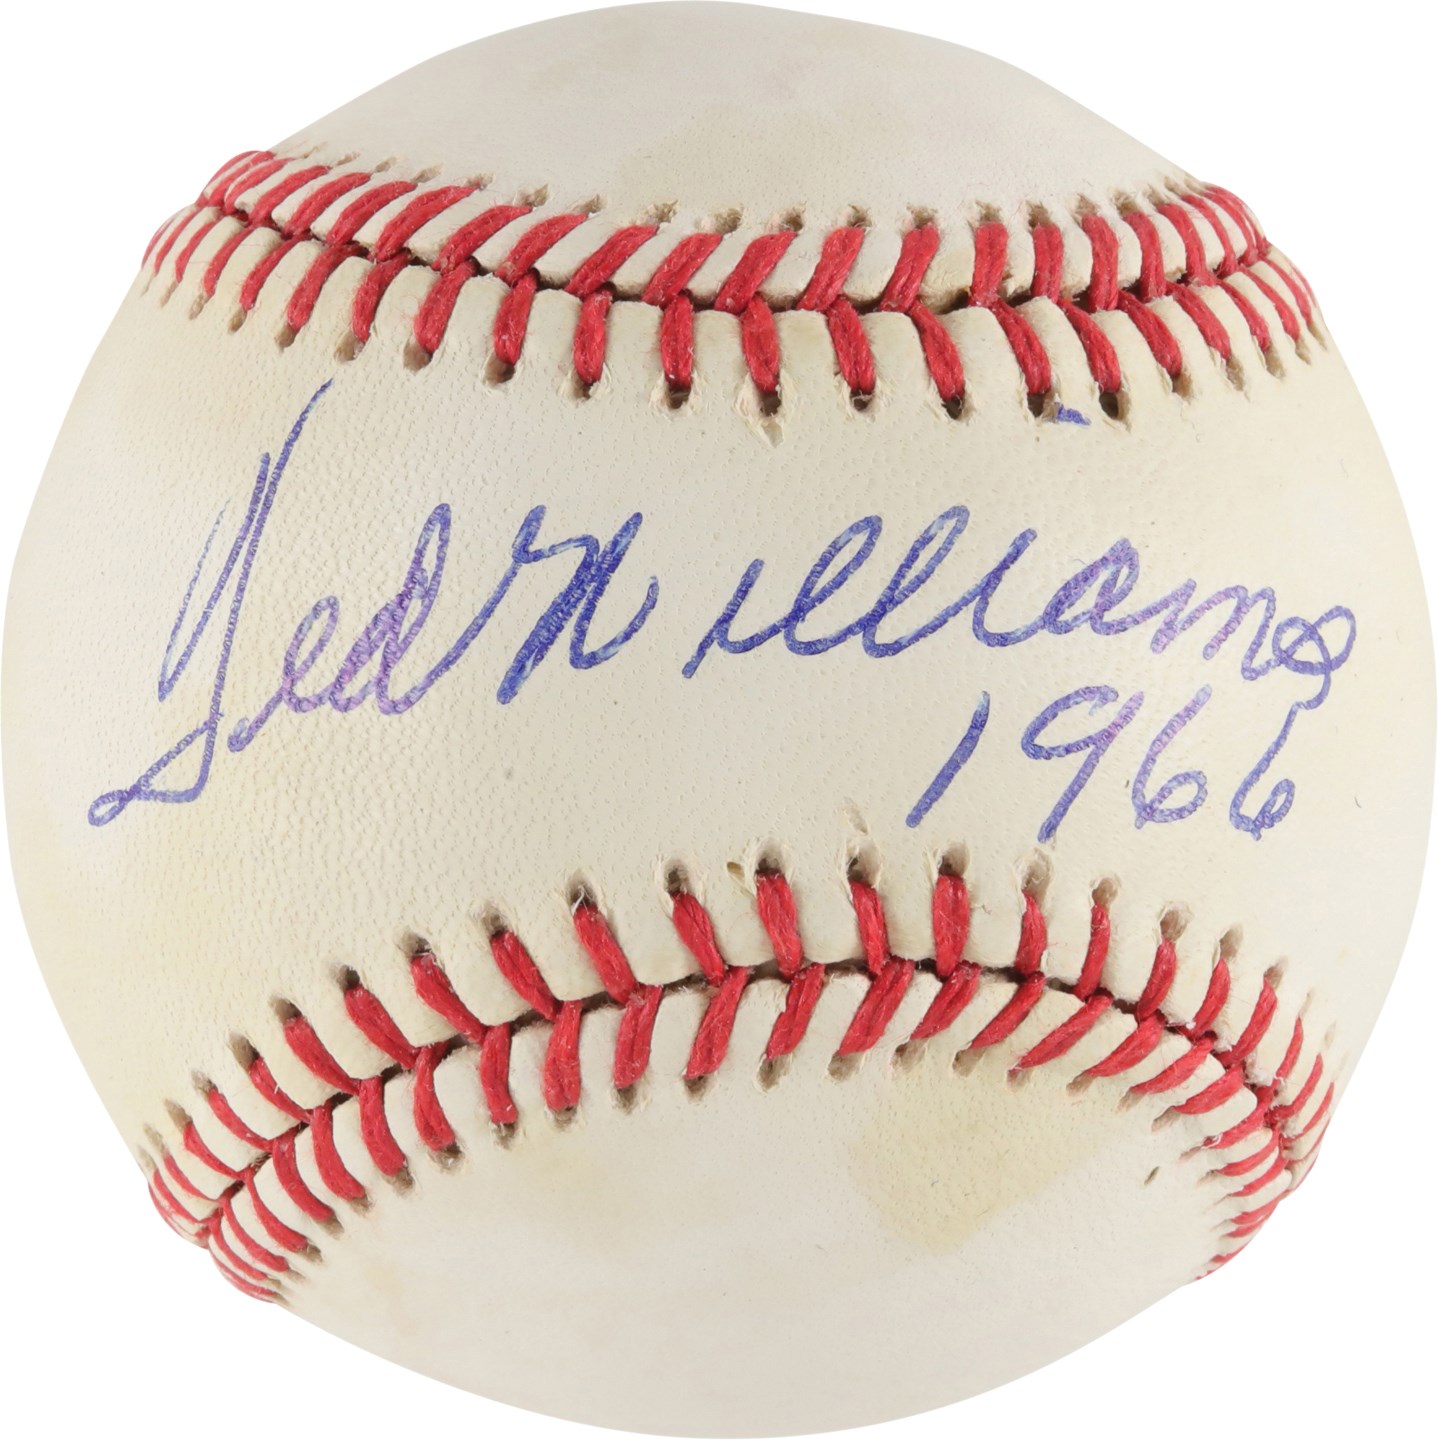 - Ted Williams Single Signed Baseball w/1966 Inscription - Hall of Fame Year (JSA)